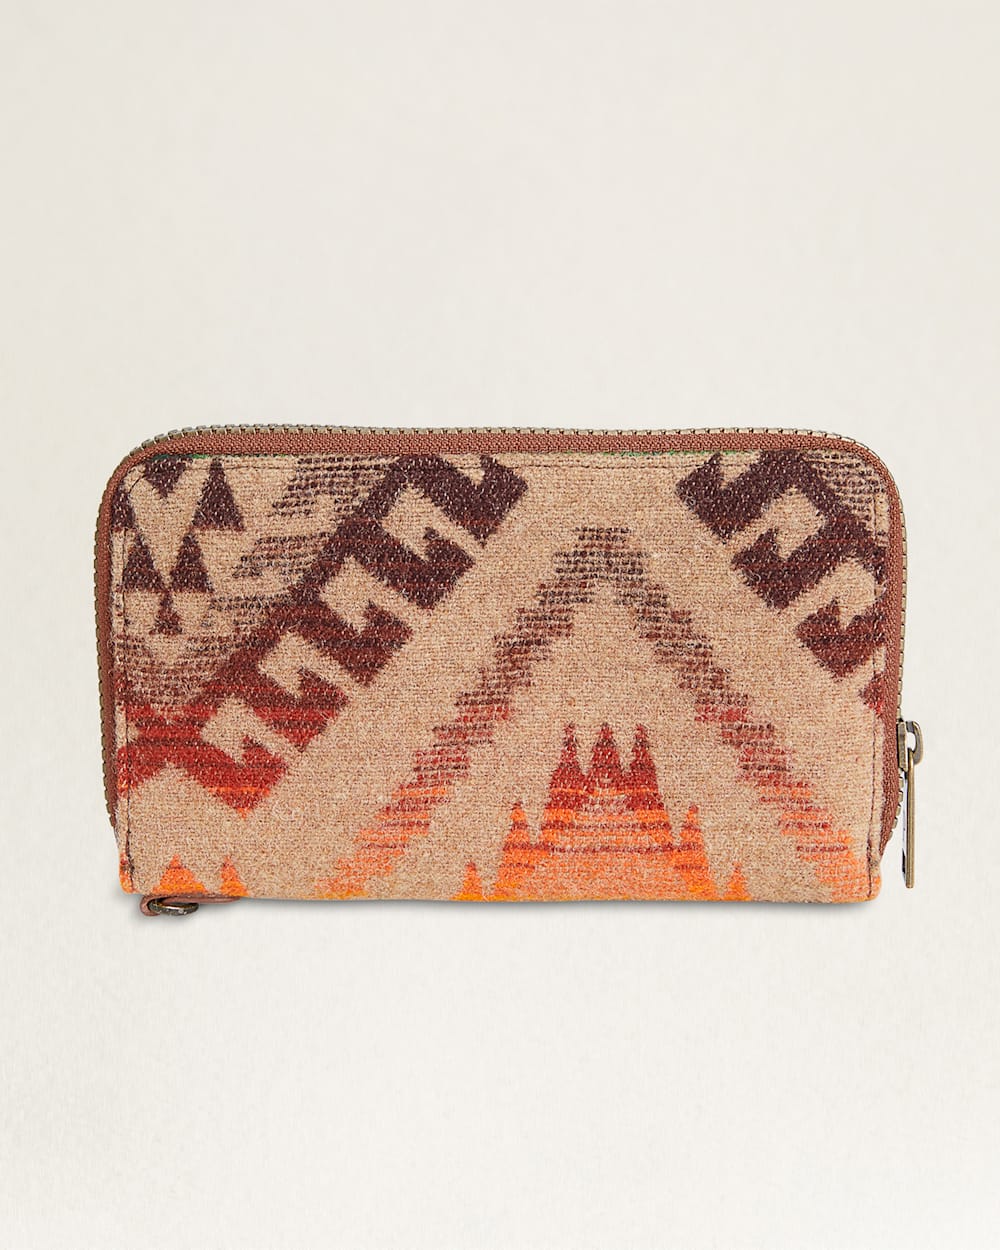 ALTERNATE VIEW OF SMARTPHONE WALLET IN TAN SAWTOOTH MOUNTAIN image number 2